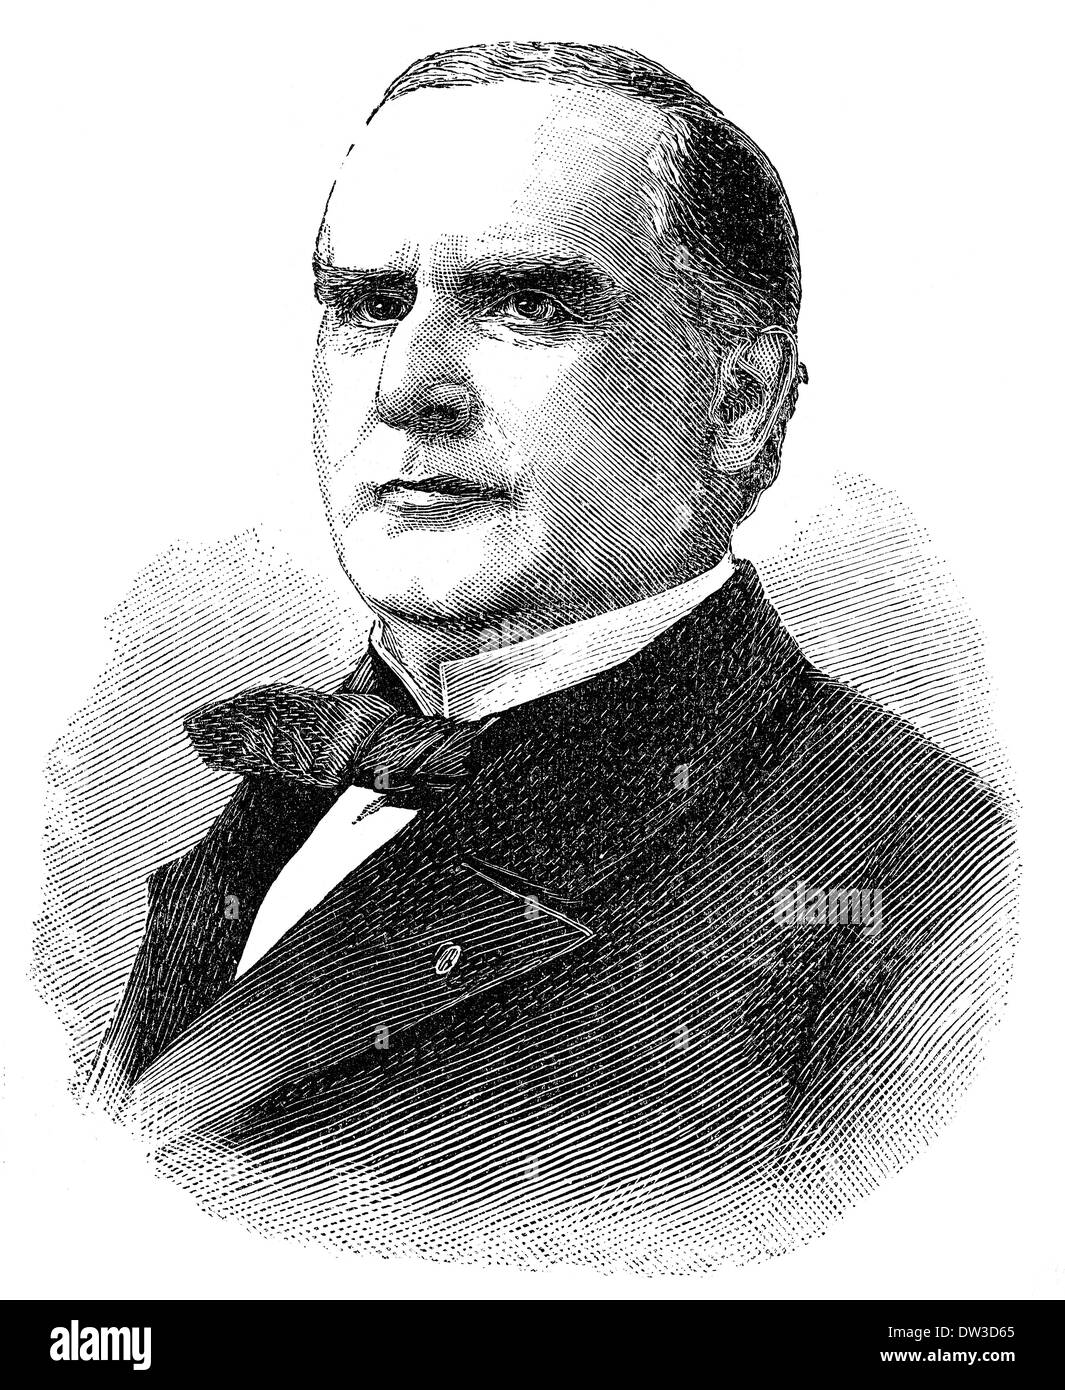 William McKinley, 1843 - 1901, the 25th President of the United States Stock Photo